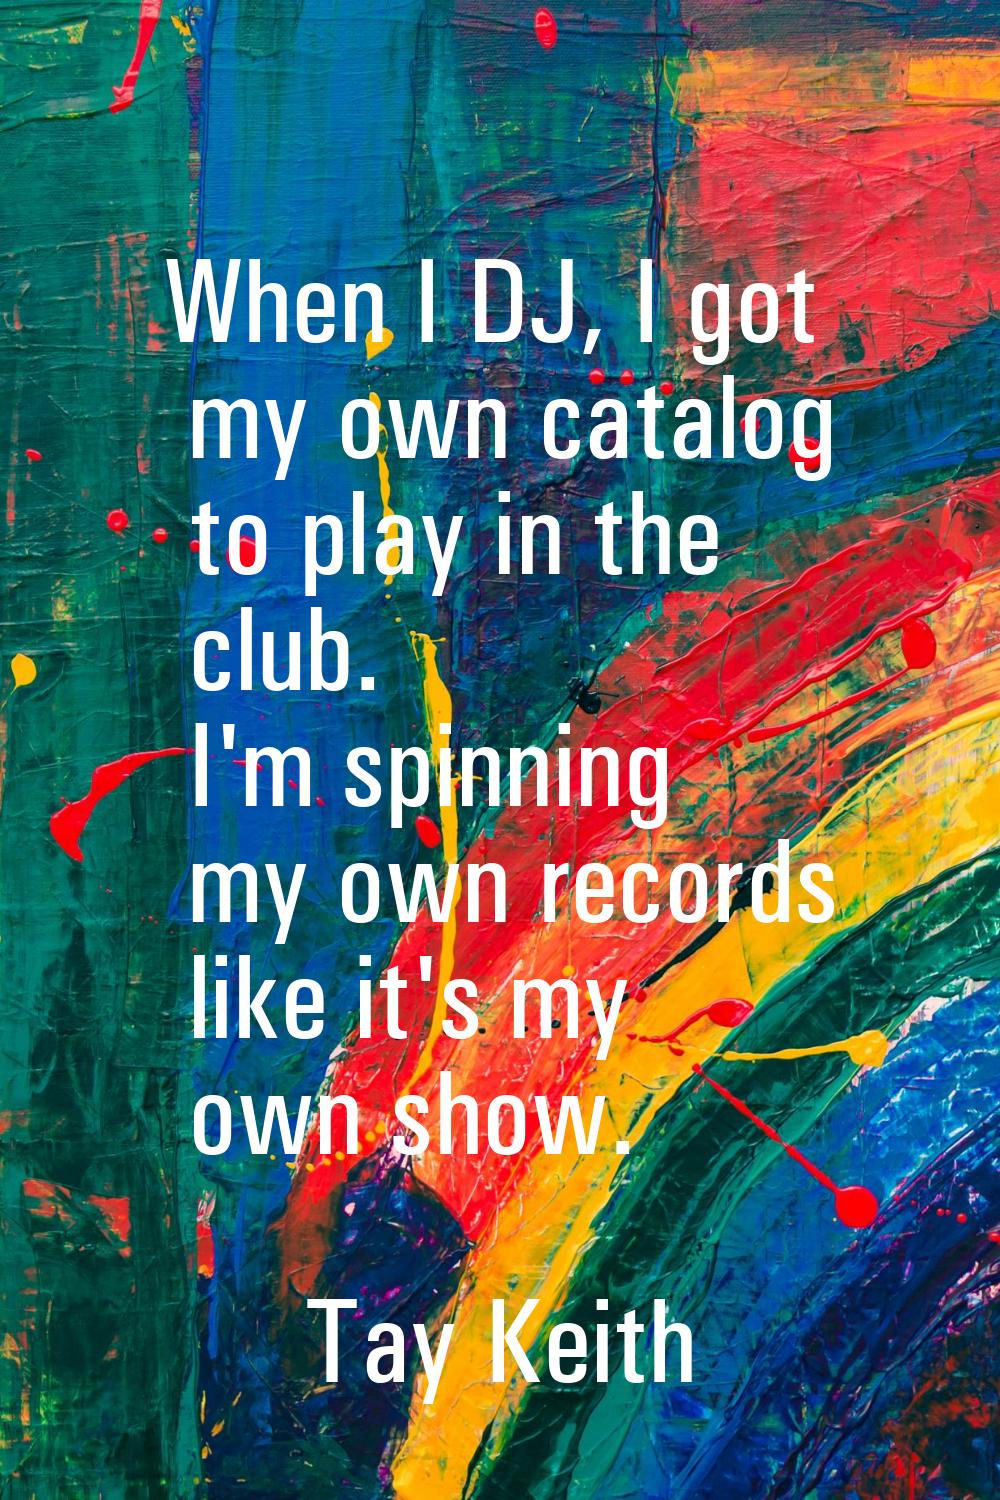 When I DJ, I got my own catalog to play in the club. I'm spinning my own records like it's my own s